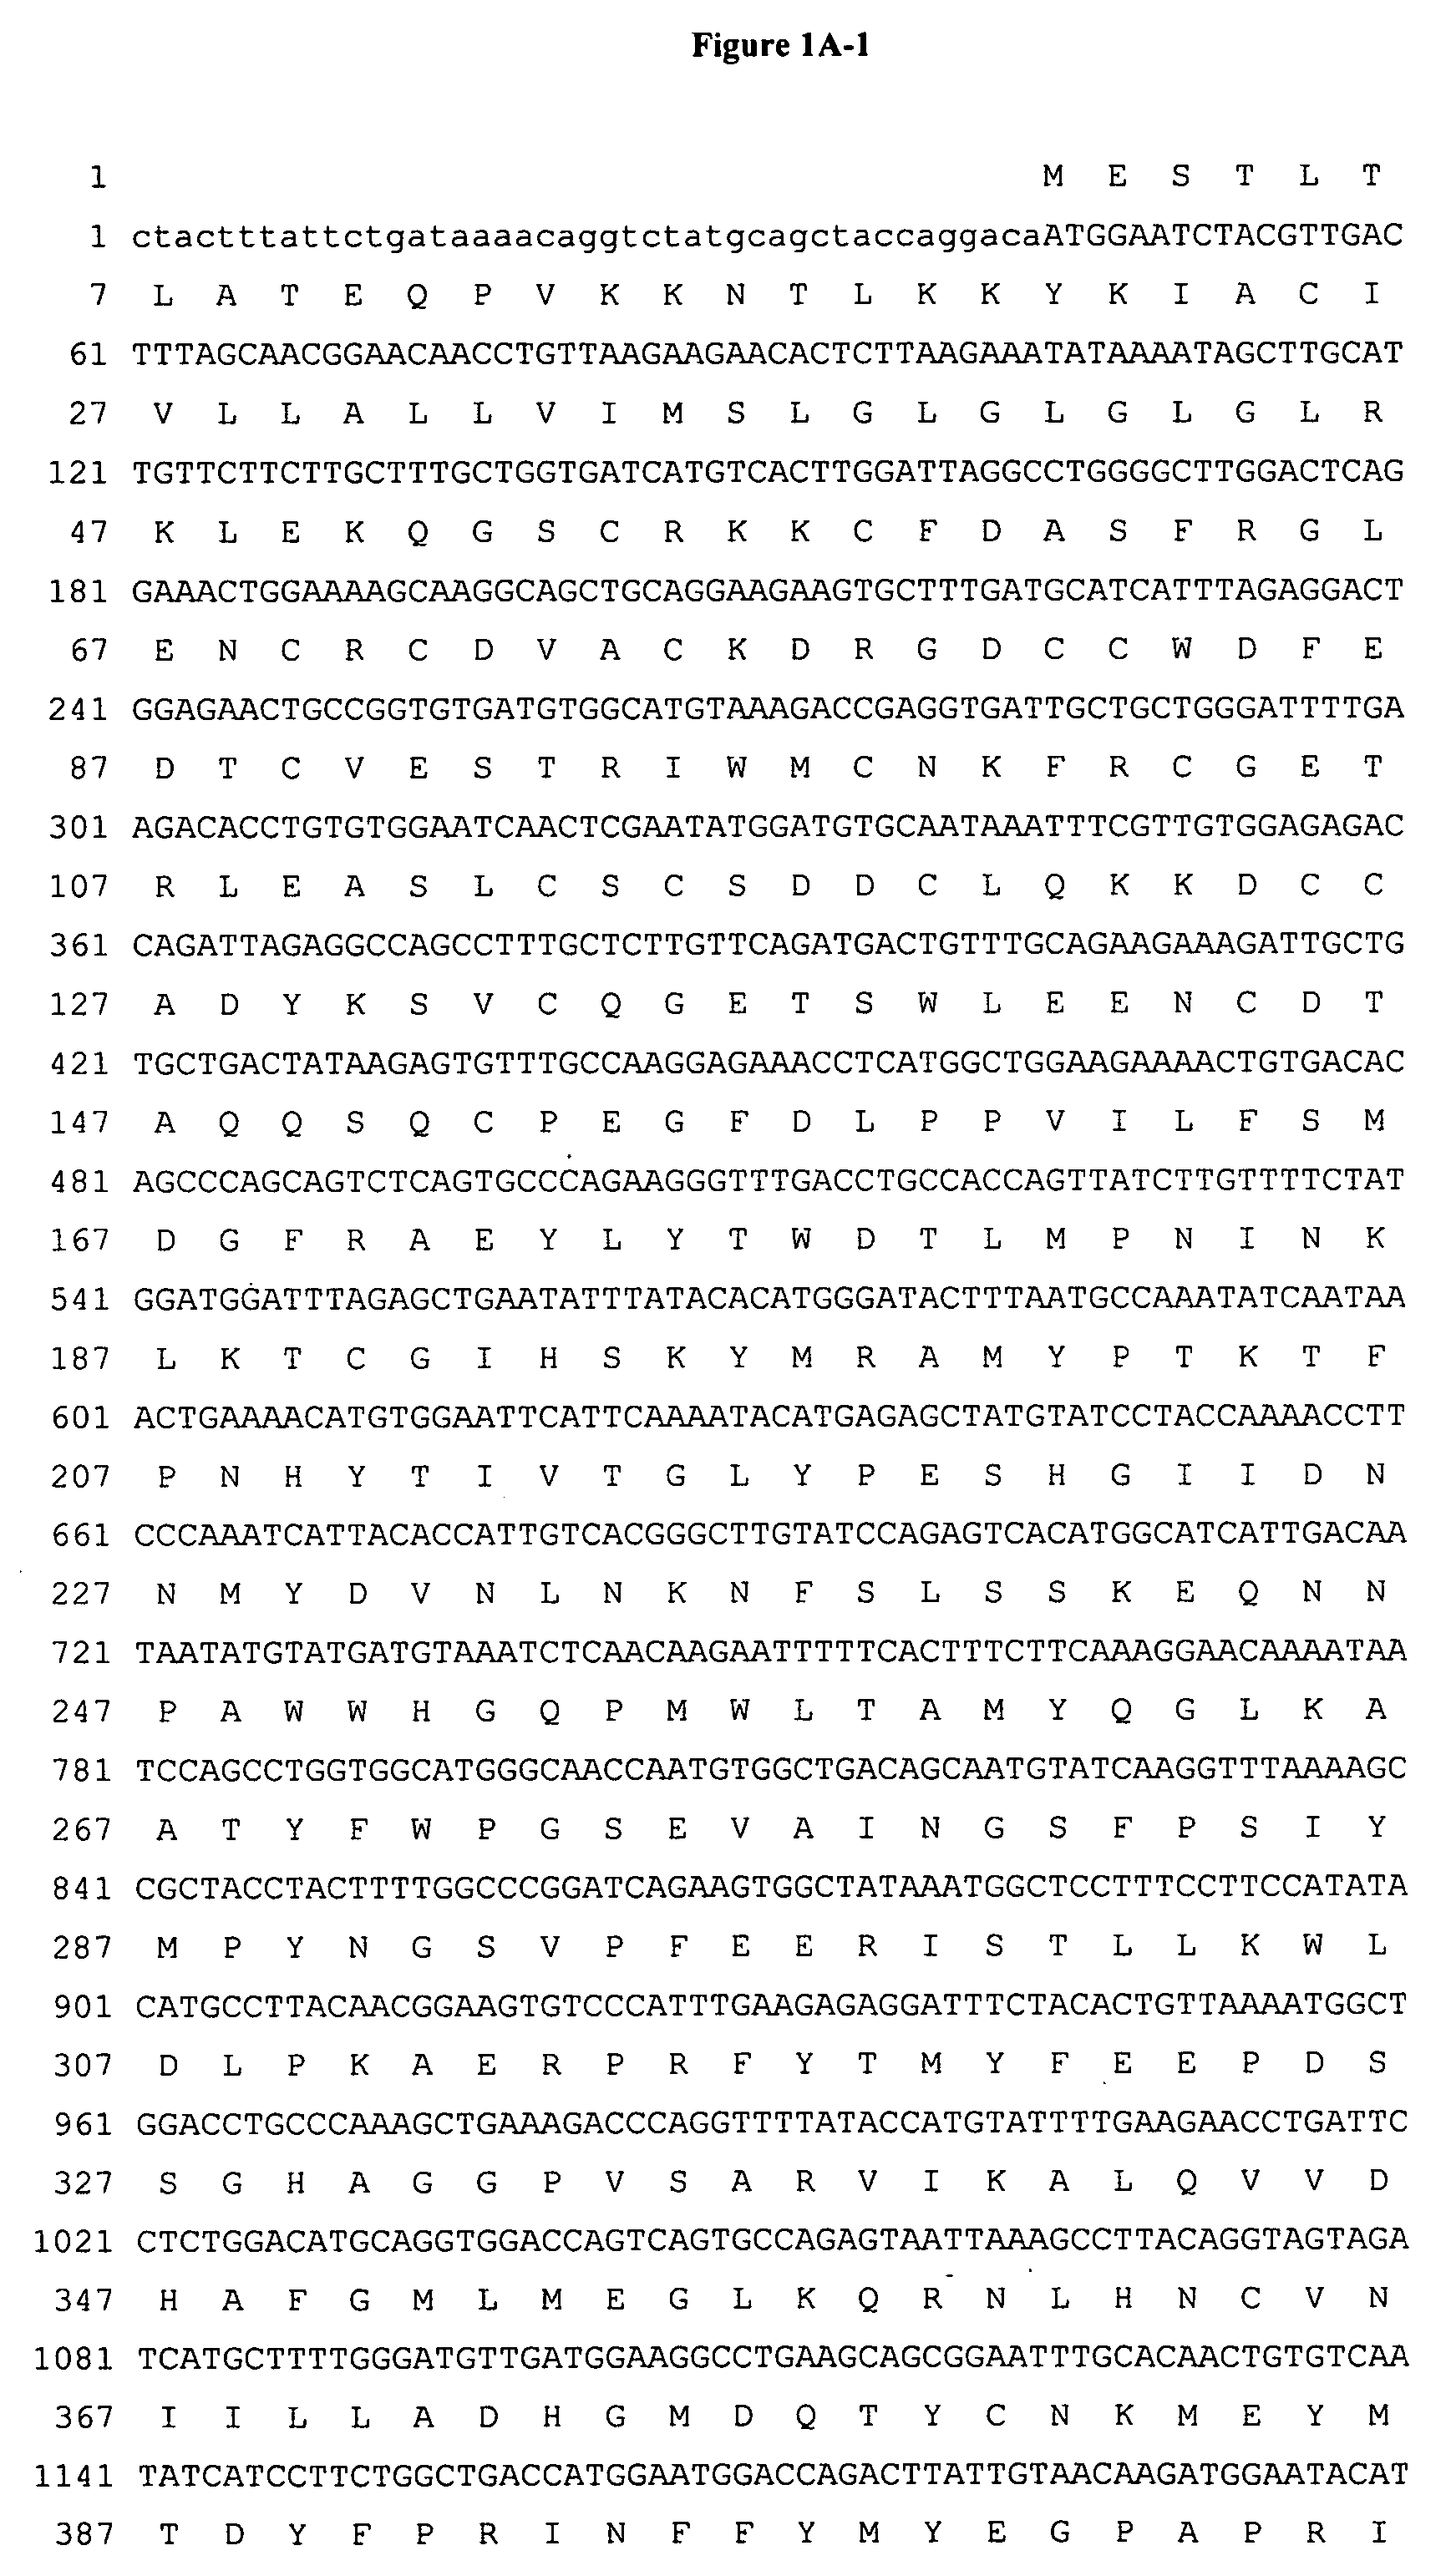 Antibodies and related molecules that bind to 161P2F10B proteins